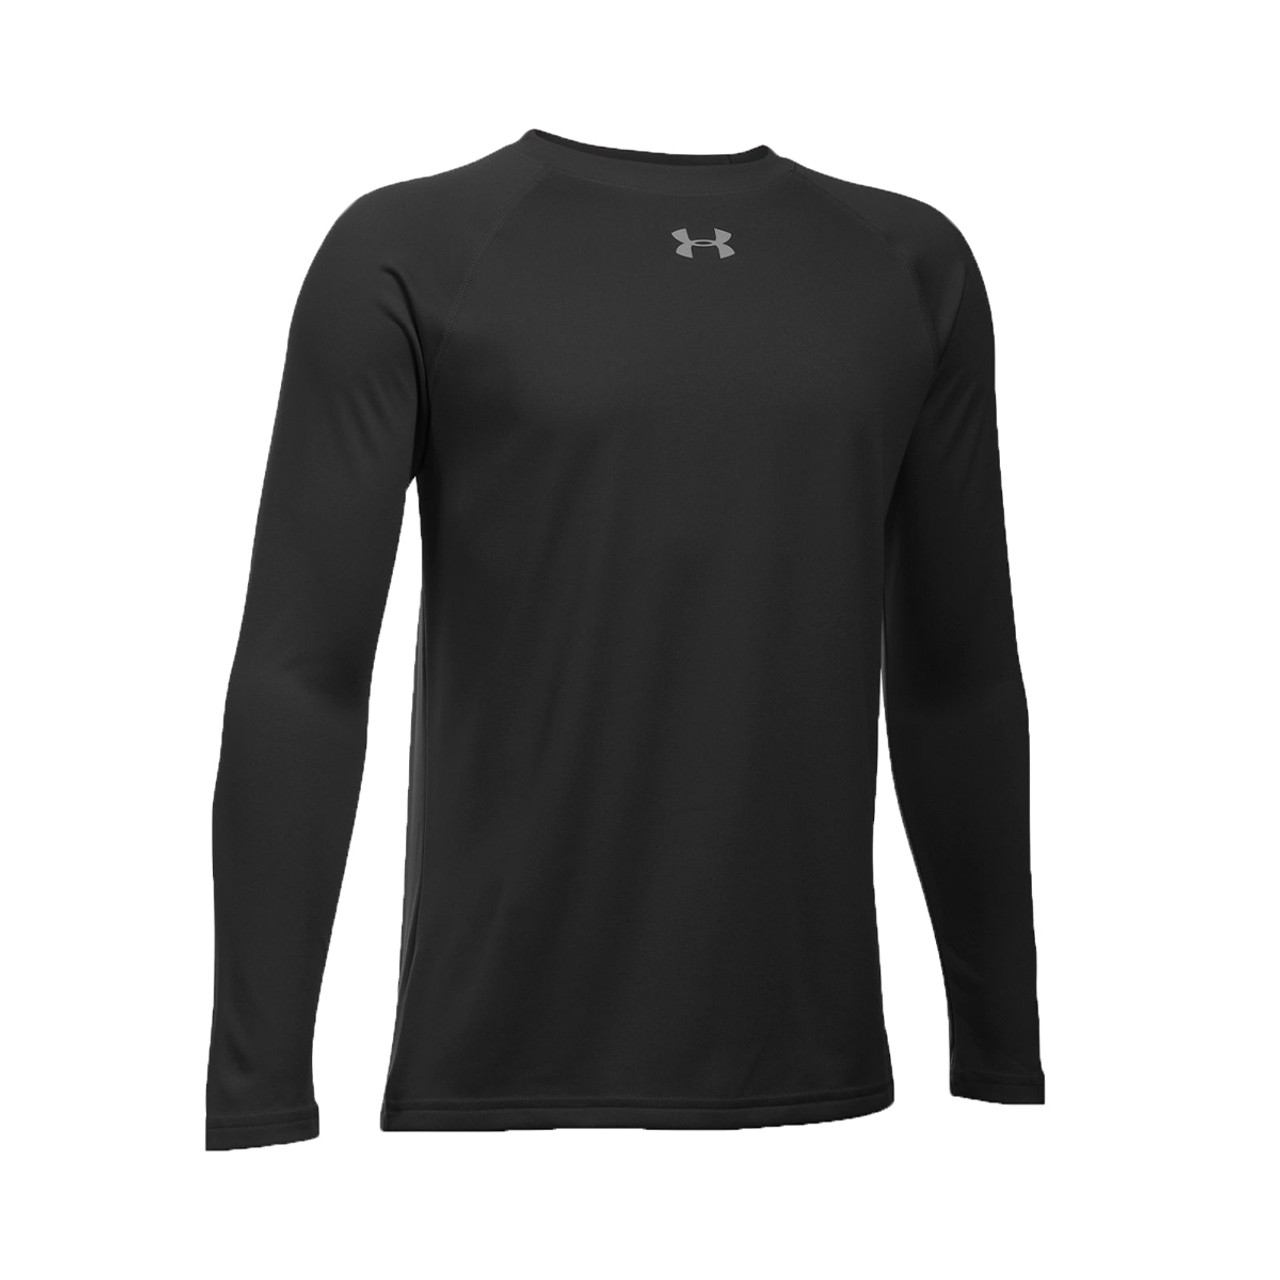 Buy White Tshirts for Women by Under Armour Online